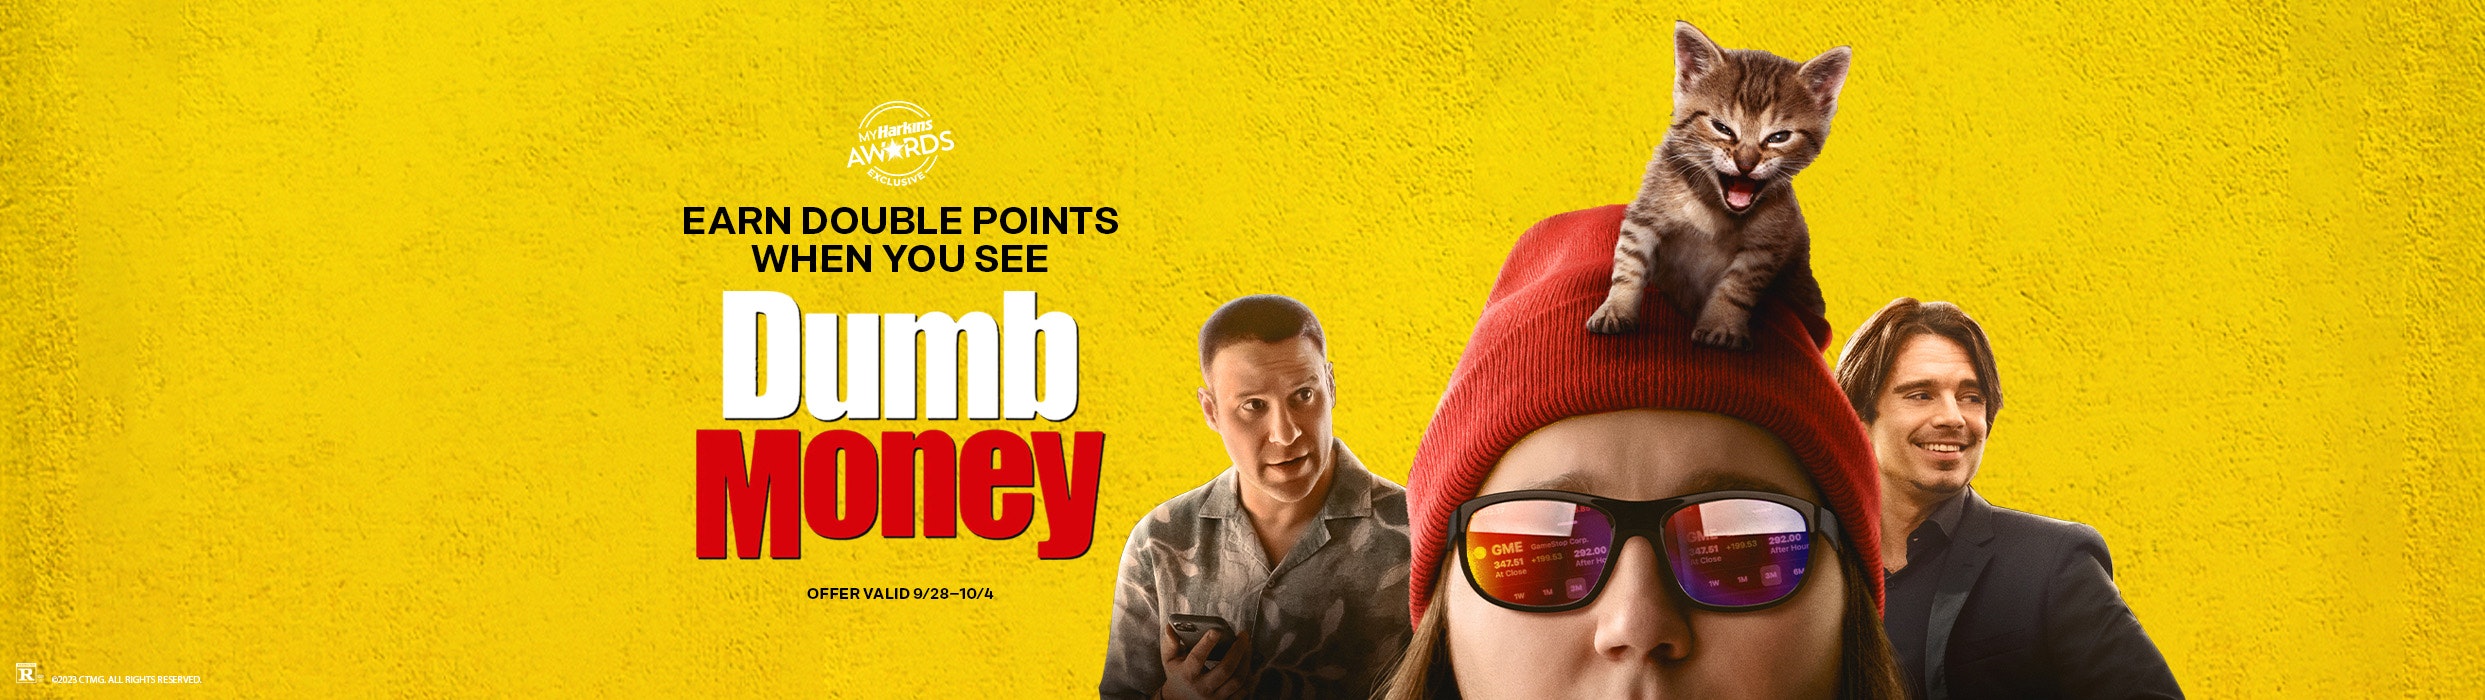 Now through October 4 see Dumb Money at Harkins and receive double points for Harkins Awards Members! Get your tickets today!